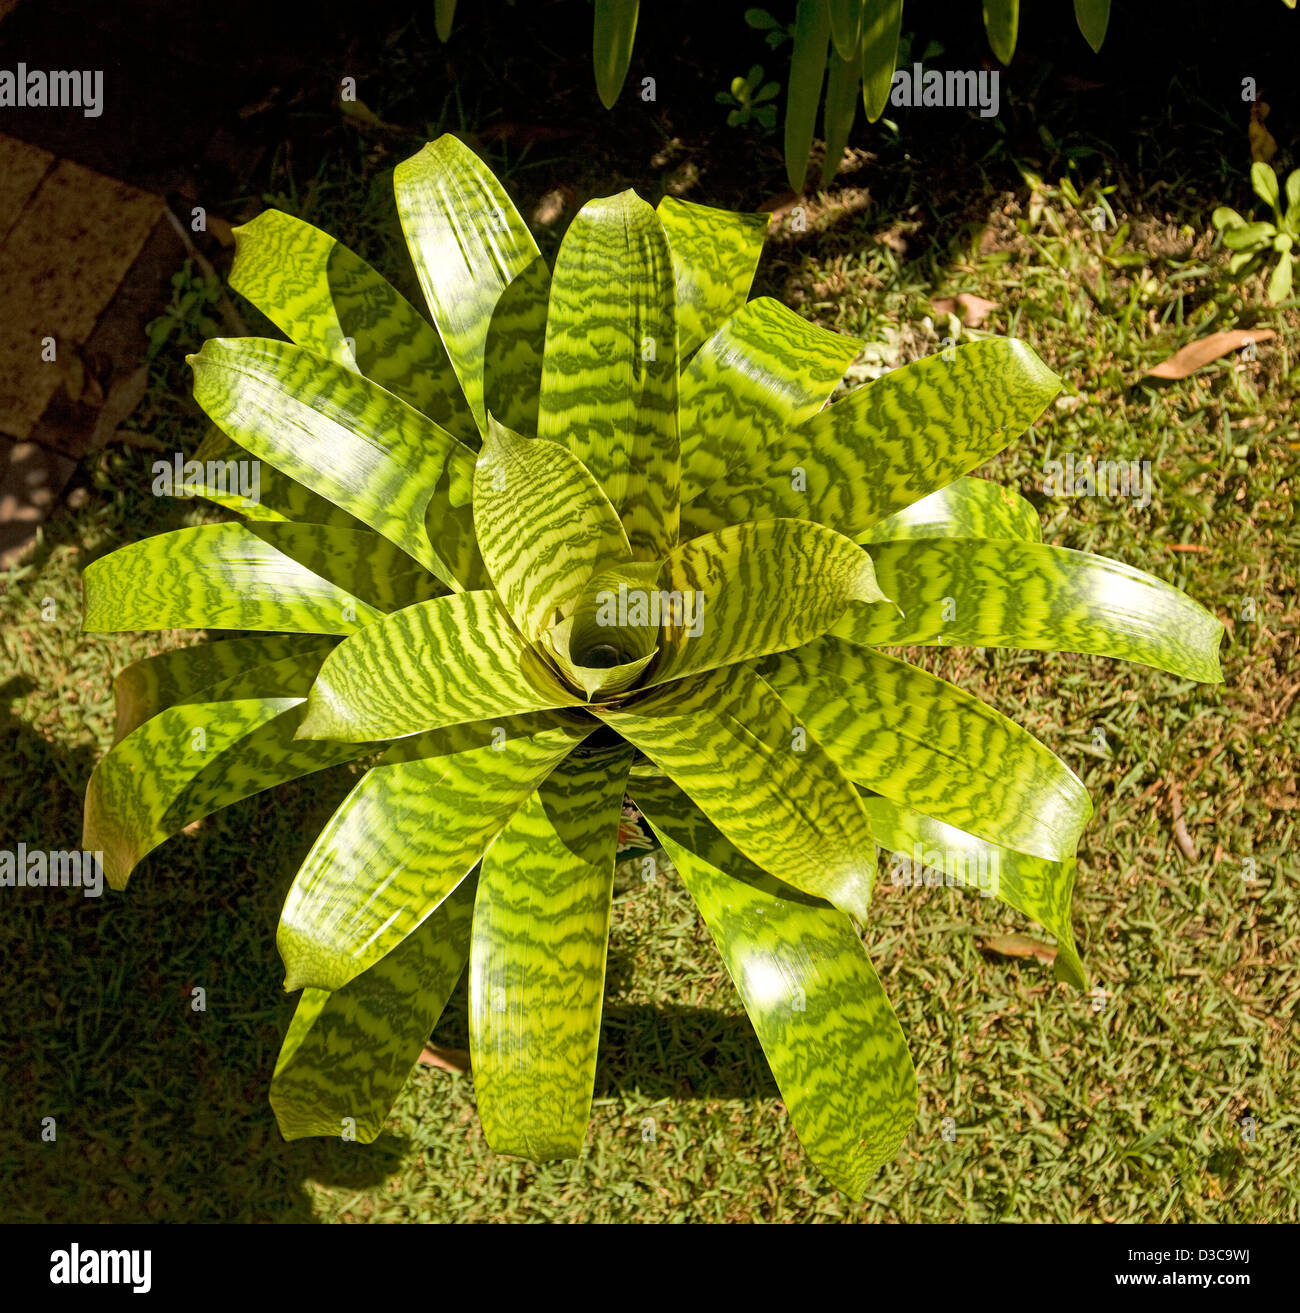 Bromeliad - Vriesia hieroglyphica - with bright green leaves with dark stripes Stock Photo